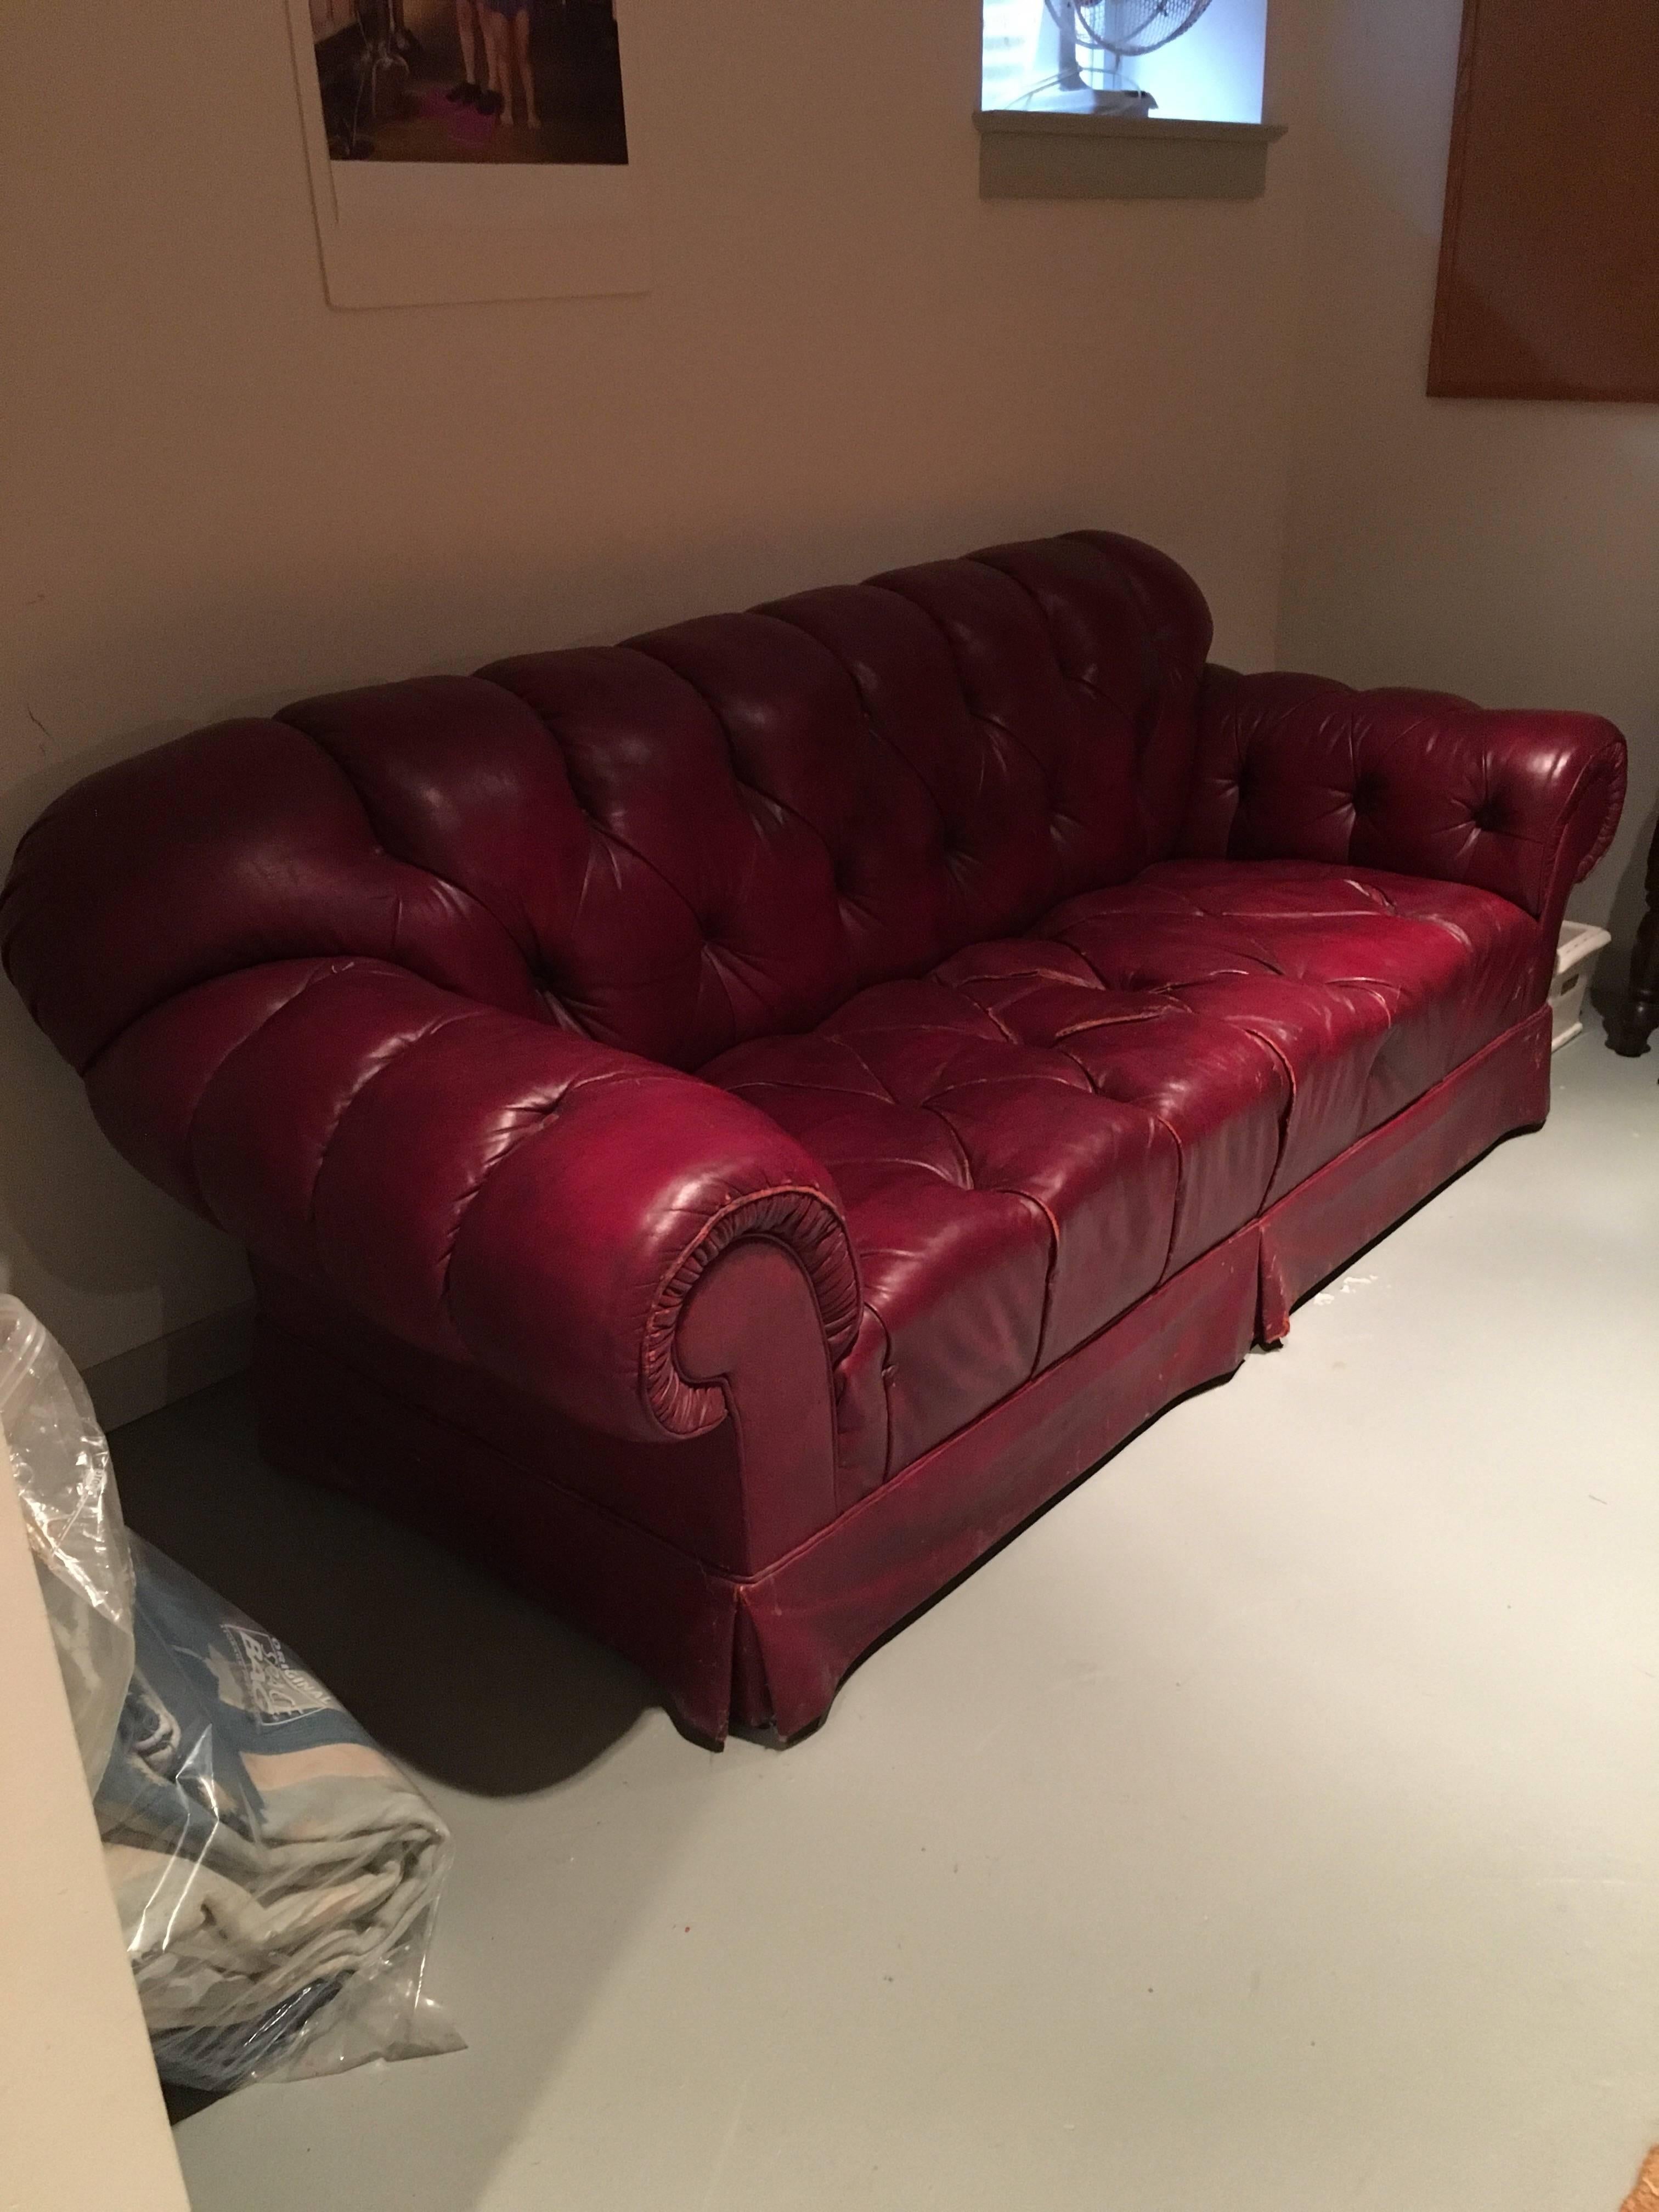 Chesterfield sofa in burgundy tufted leather with gathered rolled arms. Very comfortable sofa as is. The leather has wear and ripped in some spots. Priced to move.